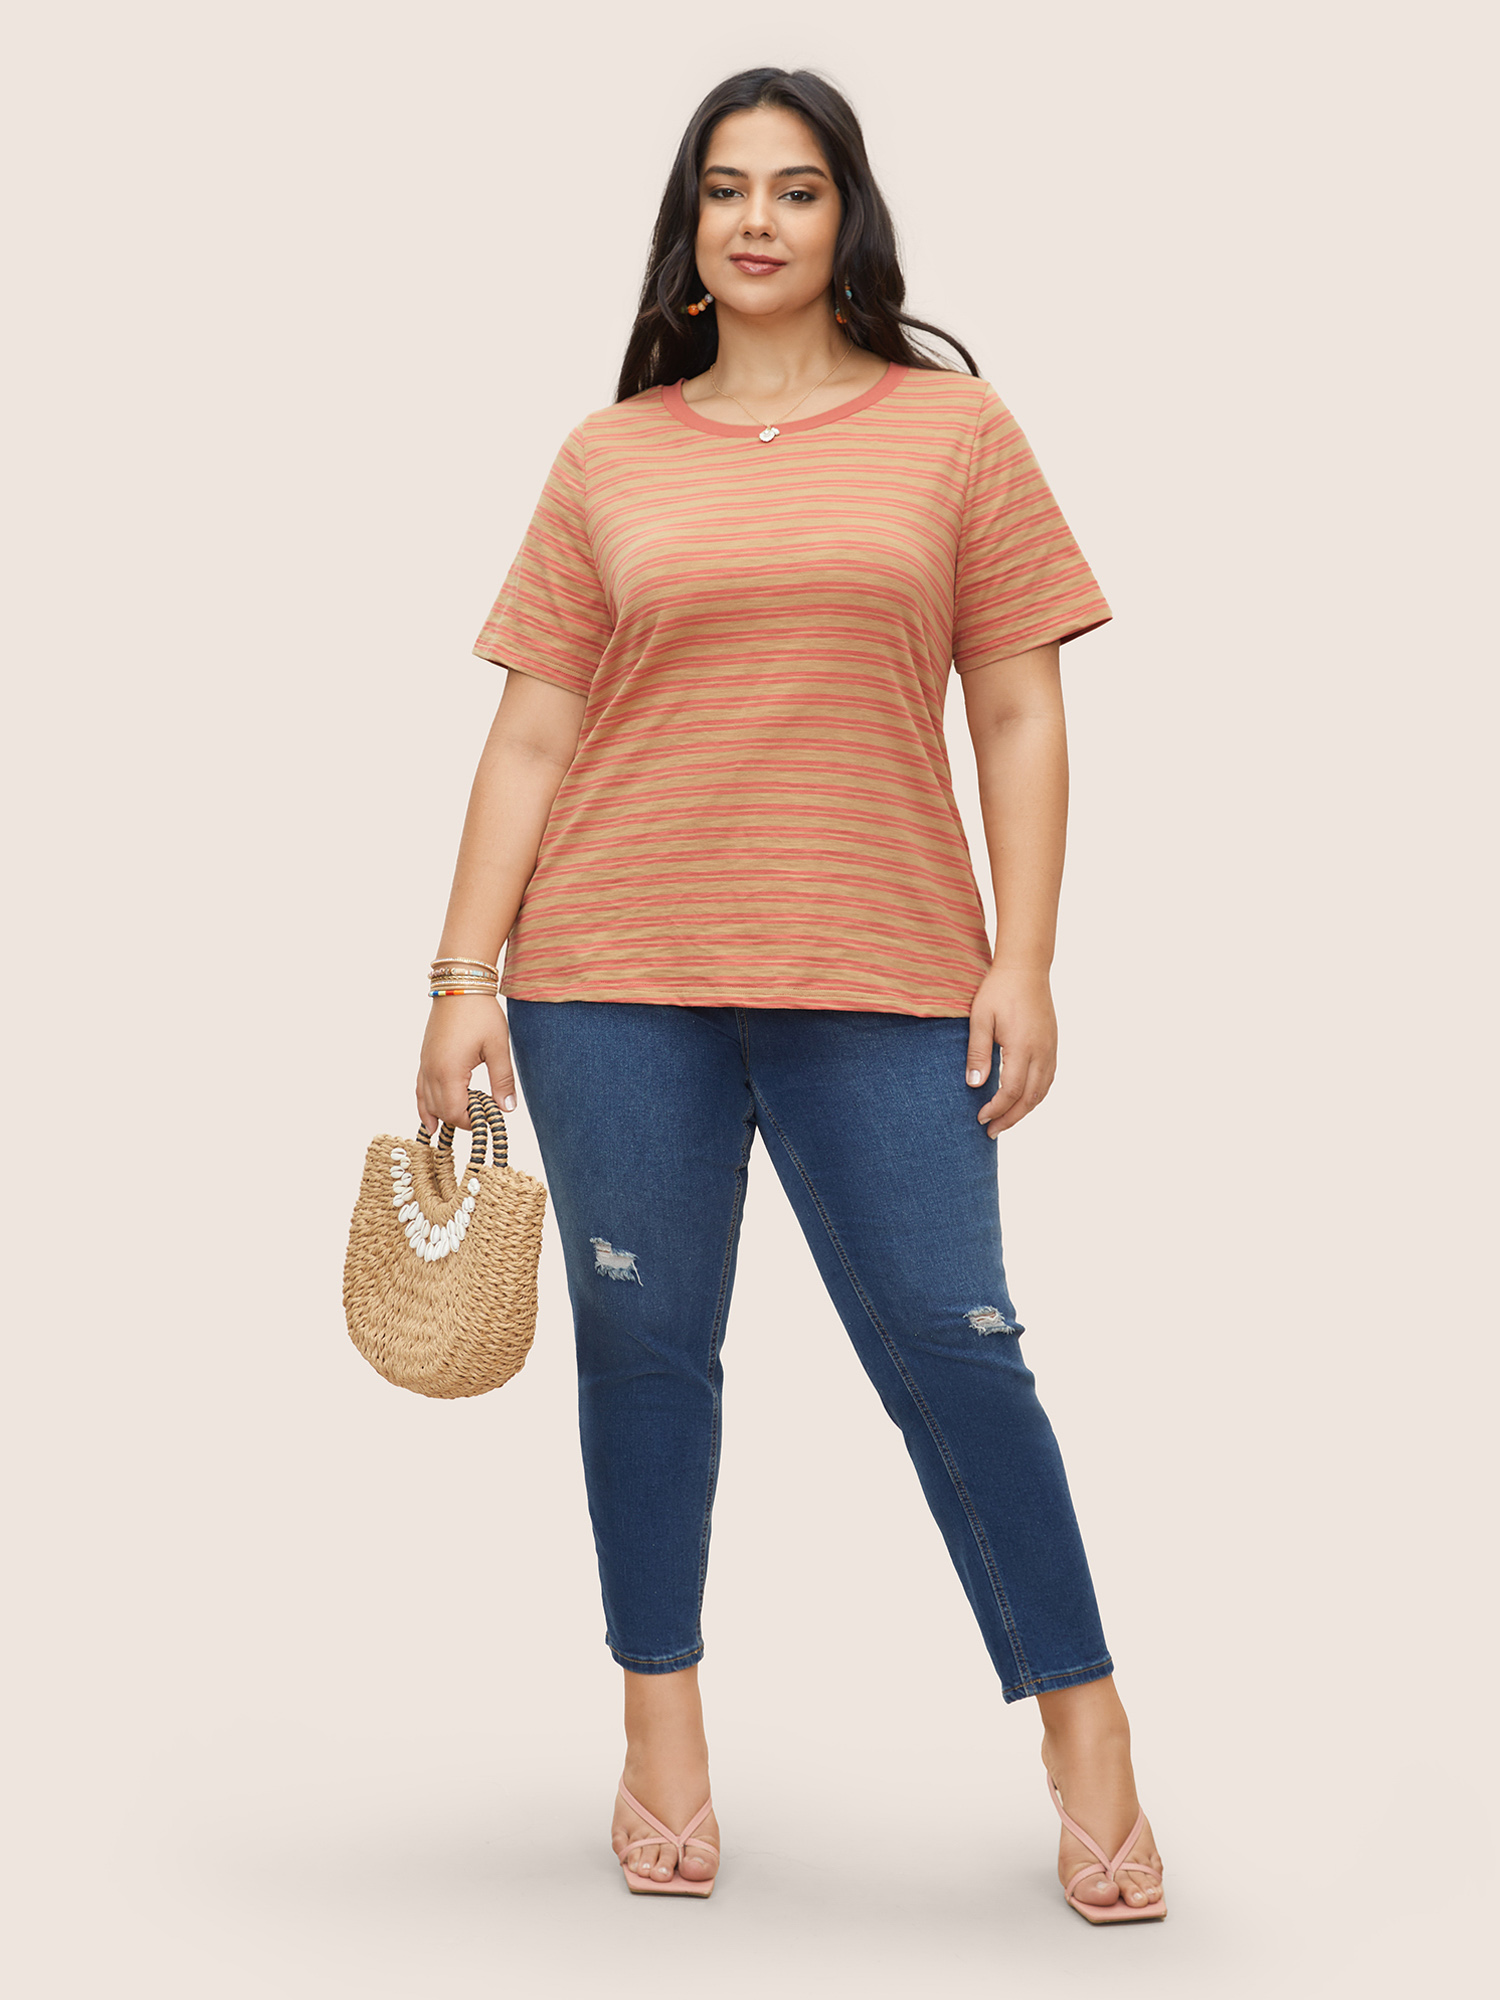 

Plus Size Colored Stripes Print Crew Neck T-shirt Tan Women Resort Contrast Round Neck Vacation T-shirts BloomChic